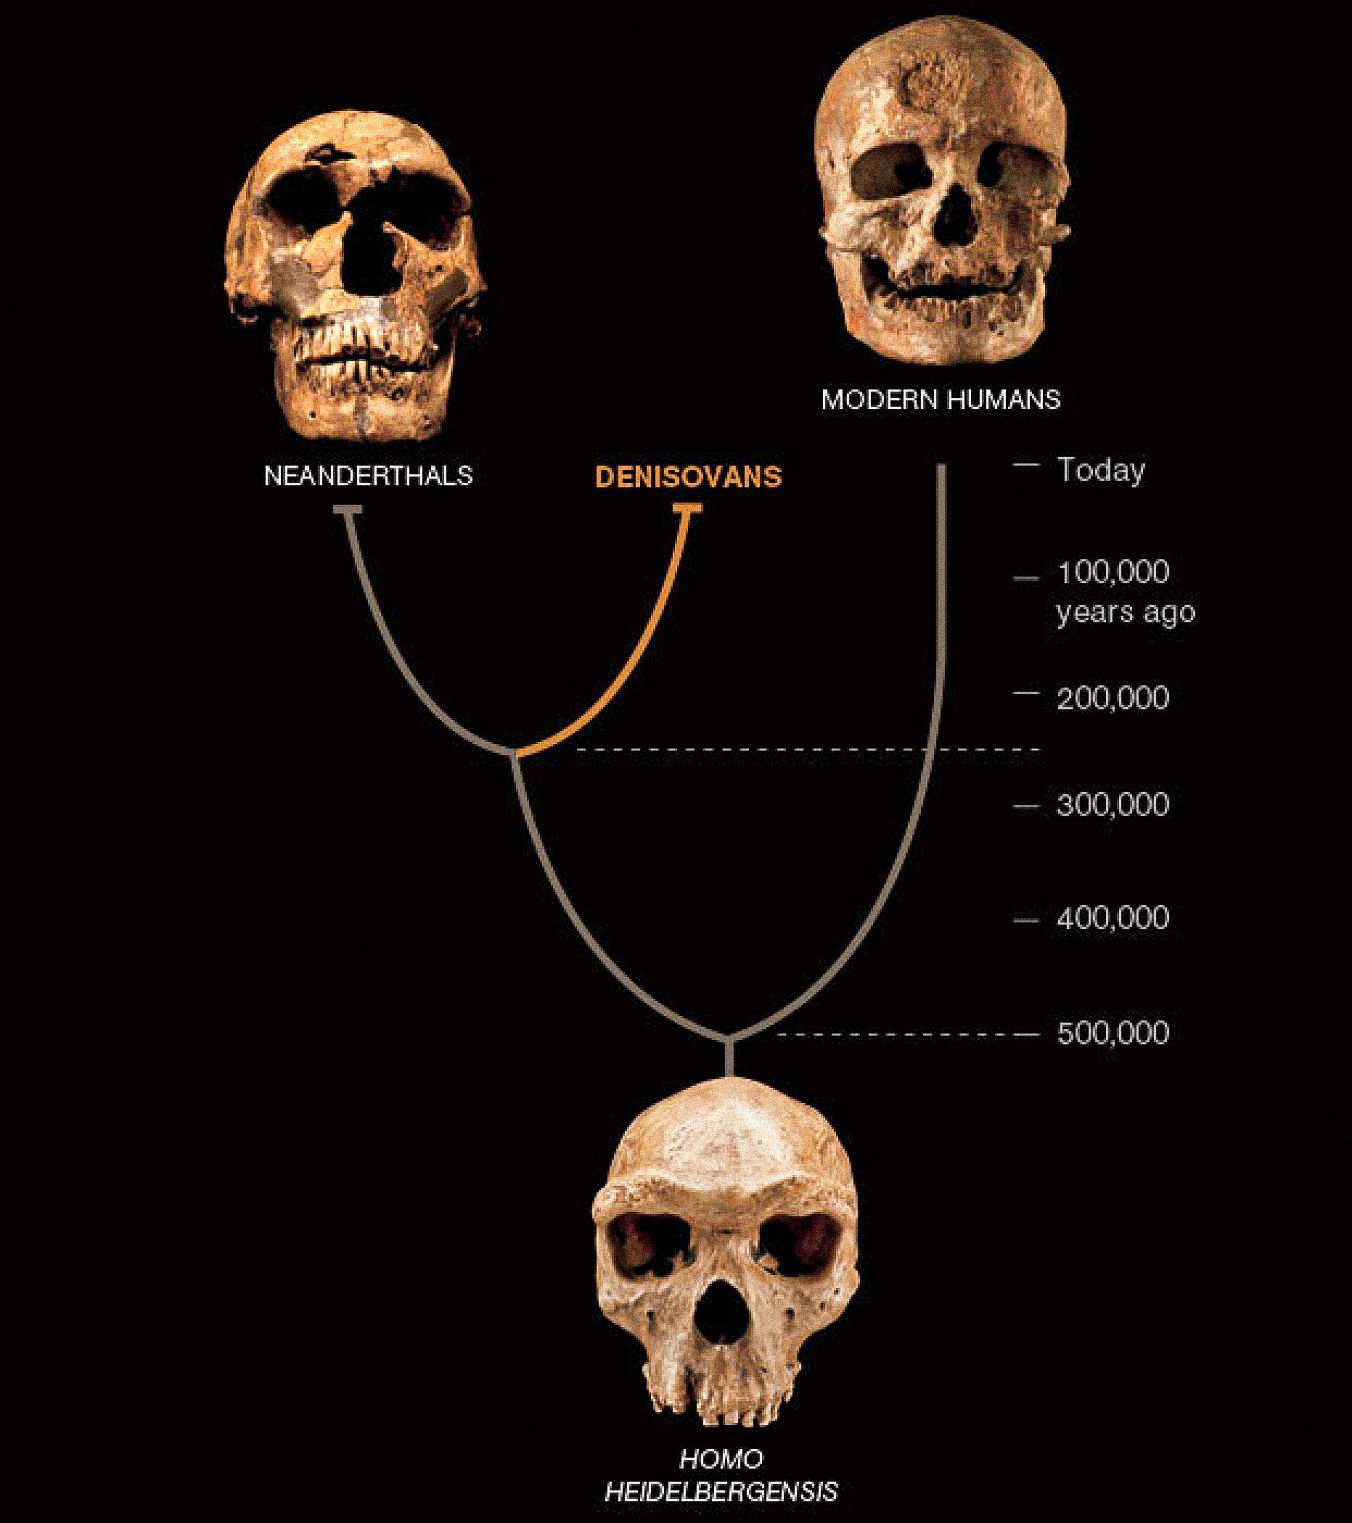 A third kind of human, called Denisovans, seems to have coexisted in Asia with Neanderthals and early modern humans. The latter two are known from abundant fossils and artifacts. Denisovans are defined so far only by the DNA from one bone chip and two teeth-but it reveals a new twist to the human story.